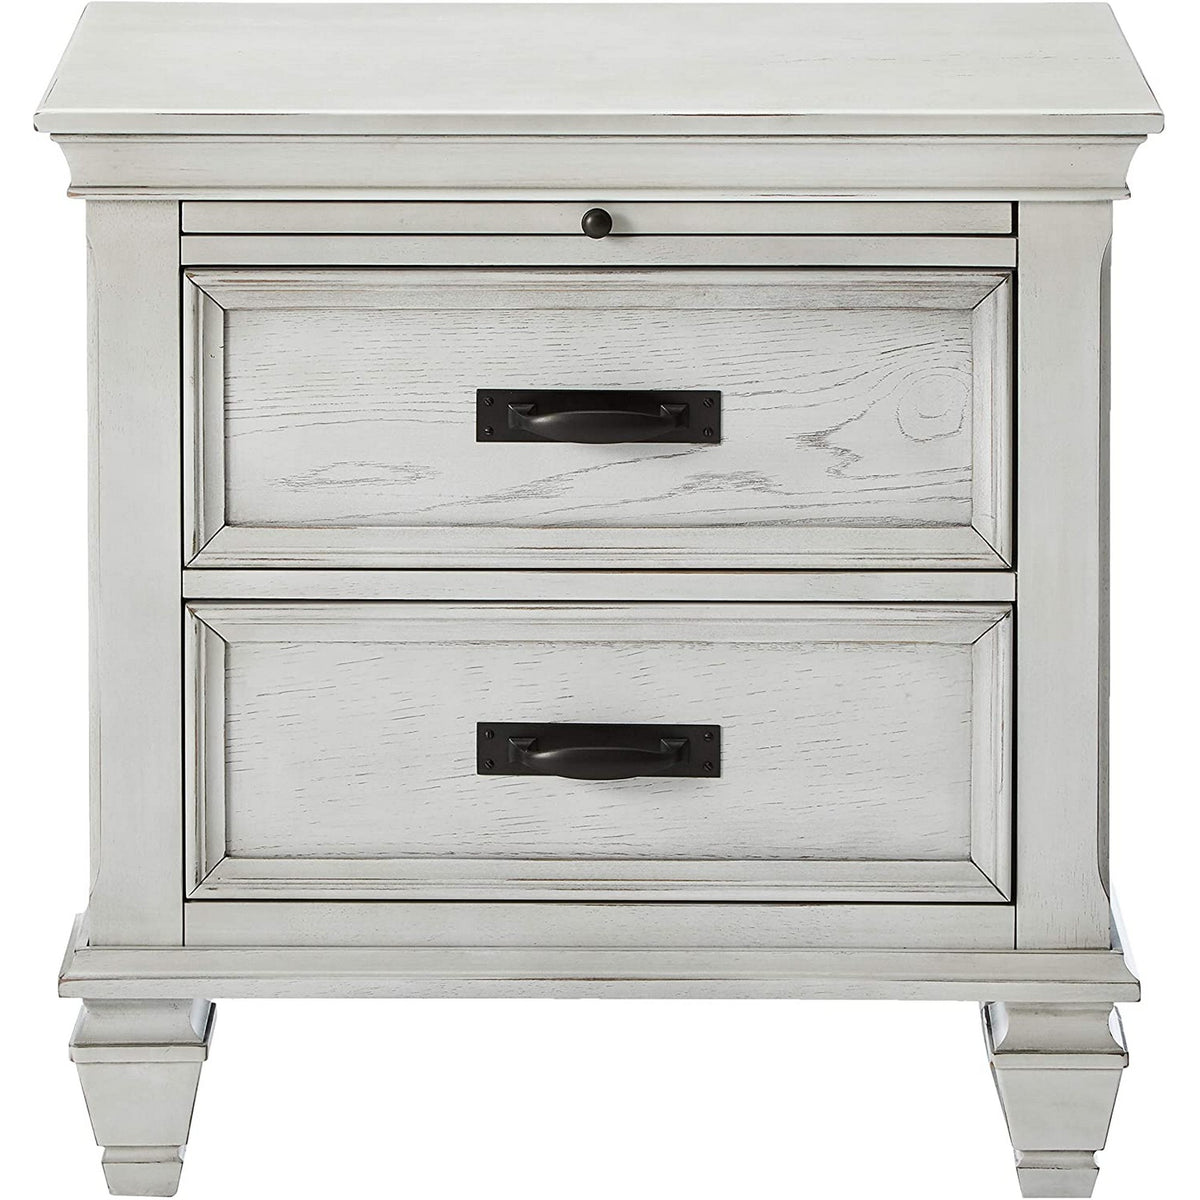 Wooden Nightstand with 2 Drawers & 1 Pull Out Tray, White - BM182751